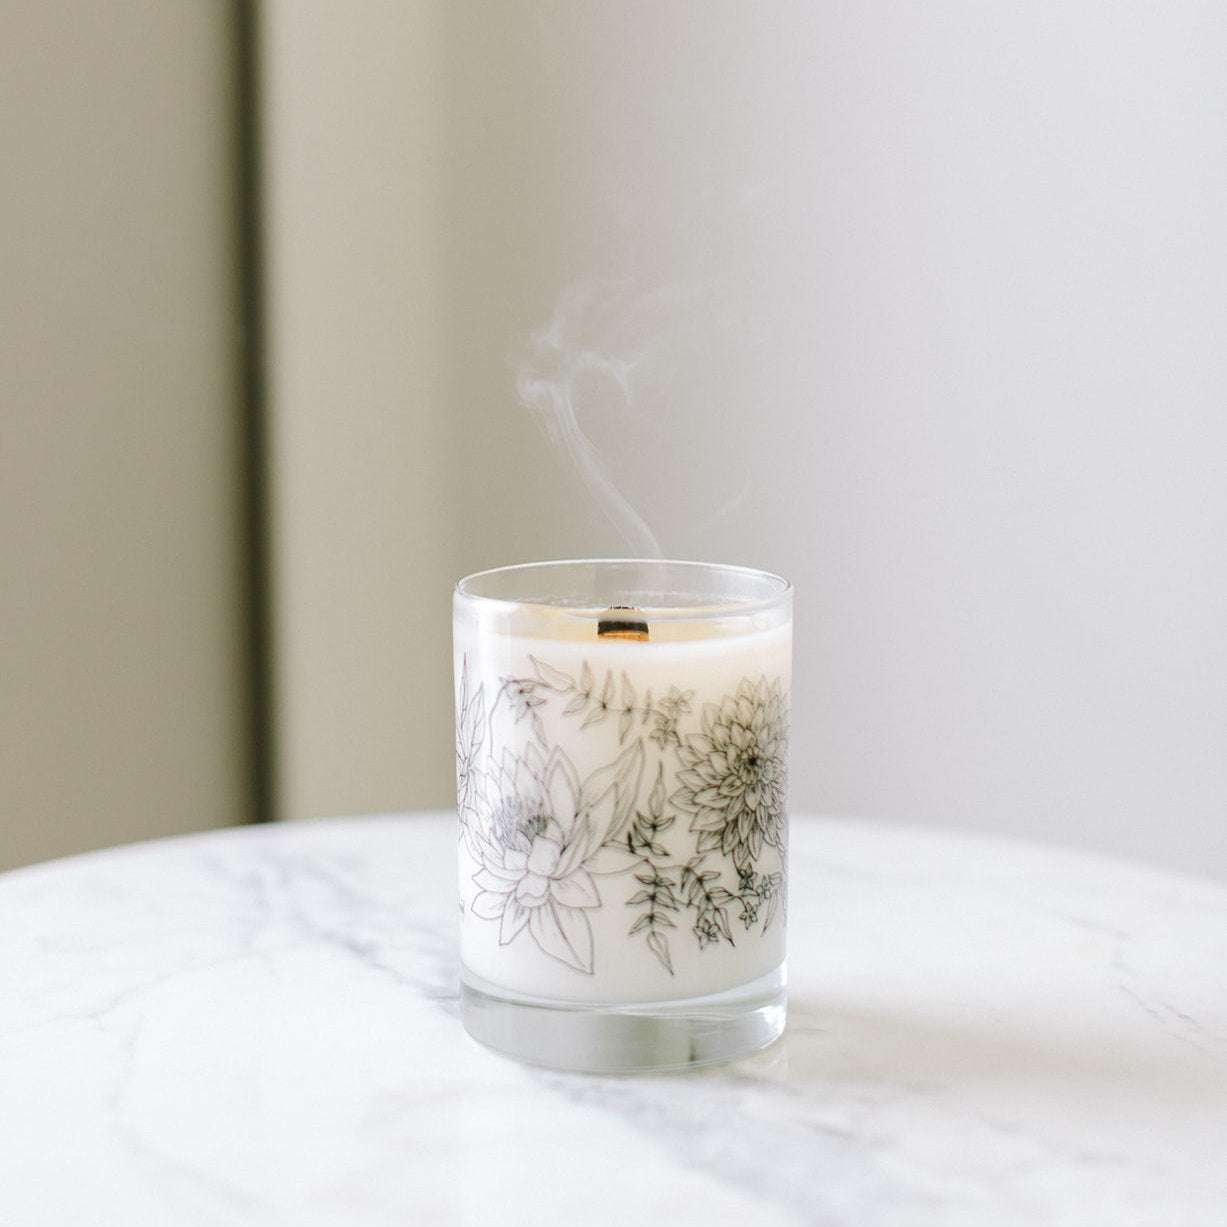 My wood wick candle won't stay lit! – Simply Curated